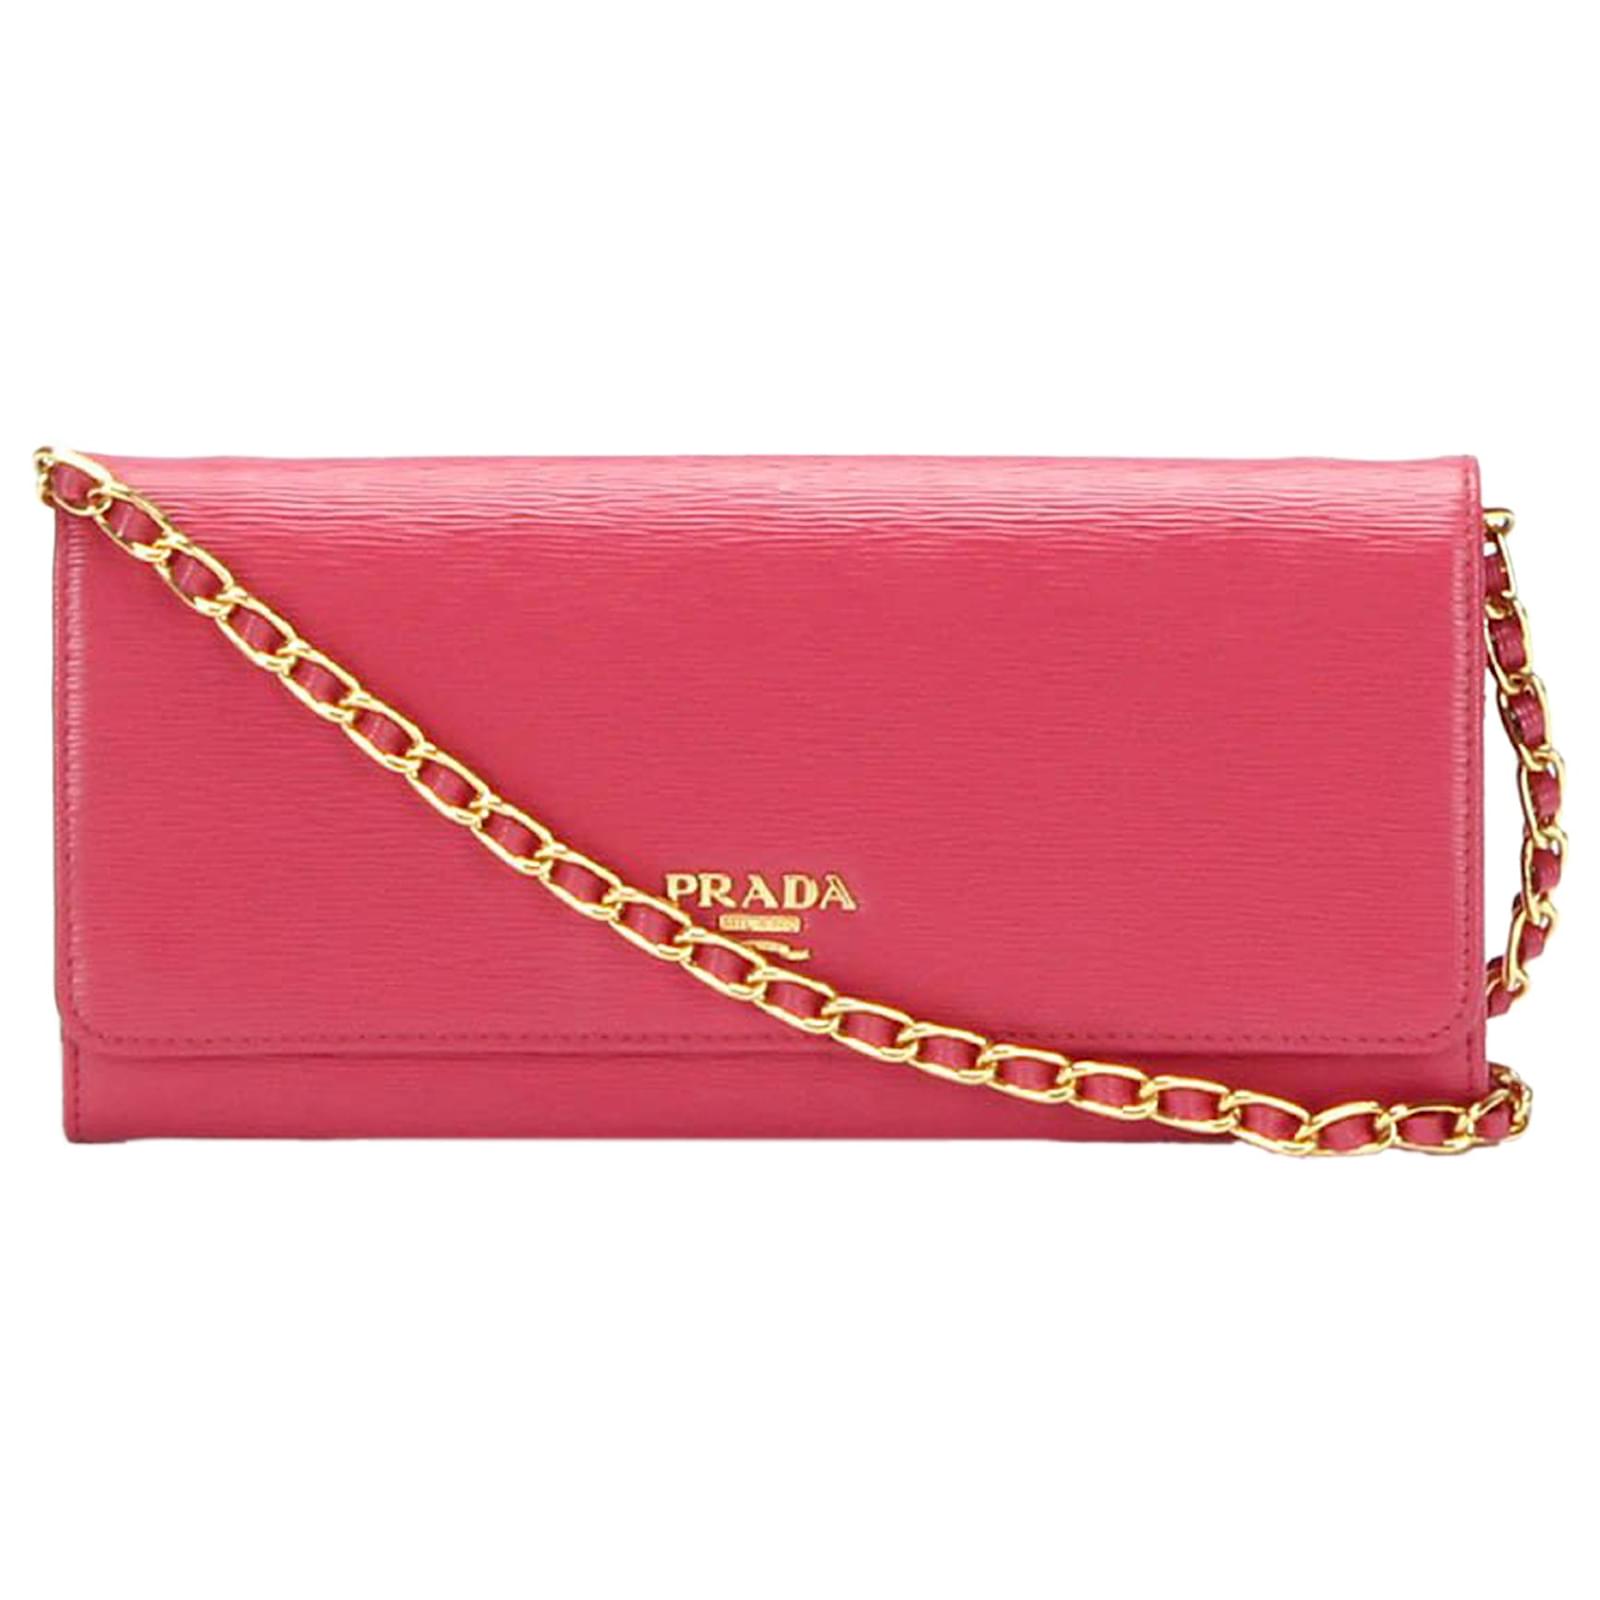 Prada Pink Saffiano Leather Wallet-On-Chain